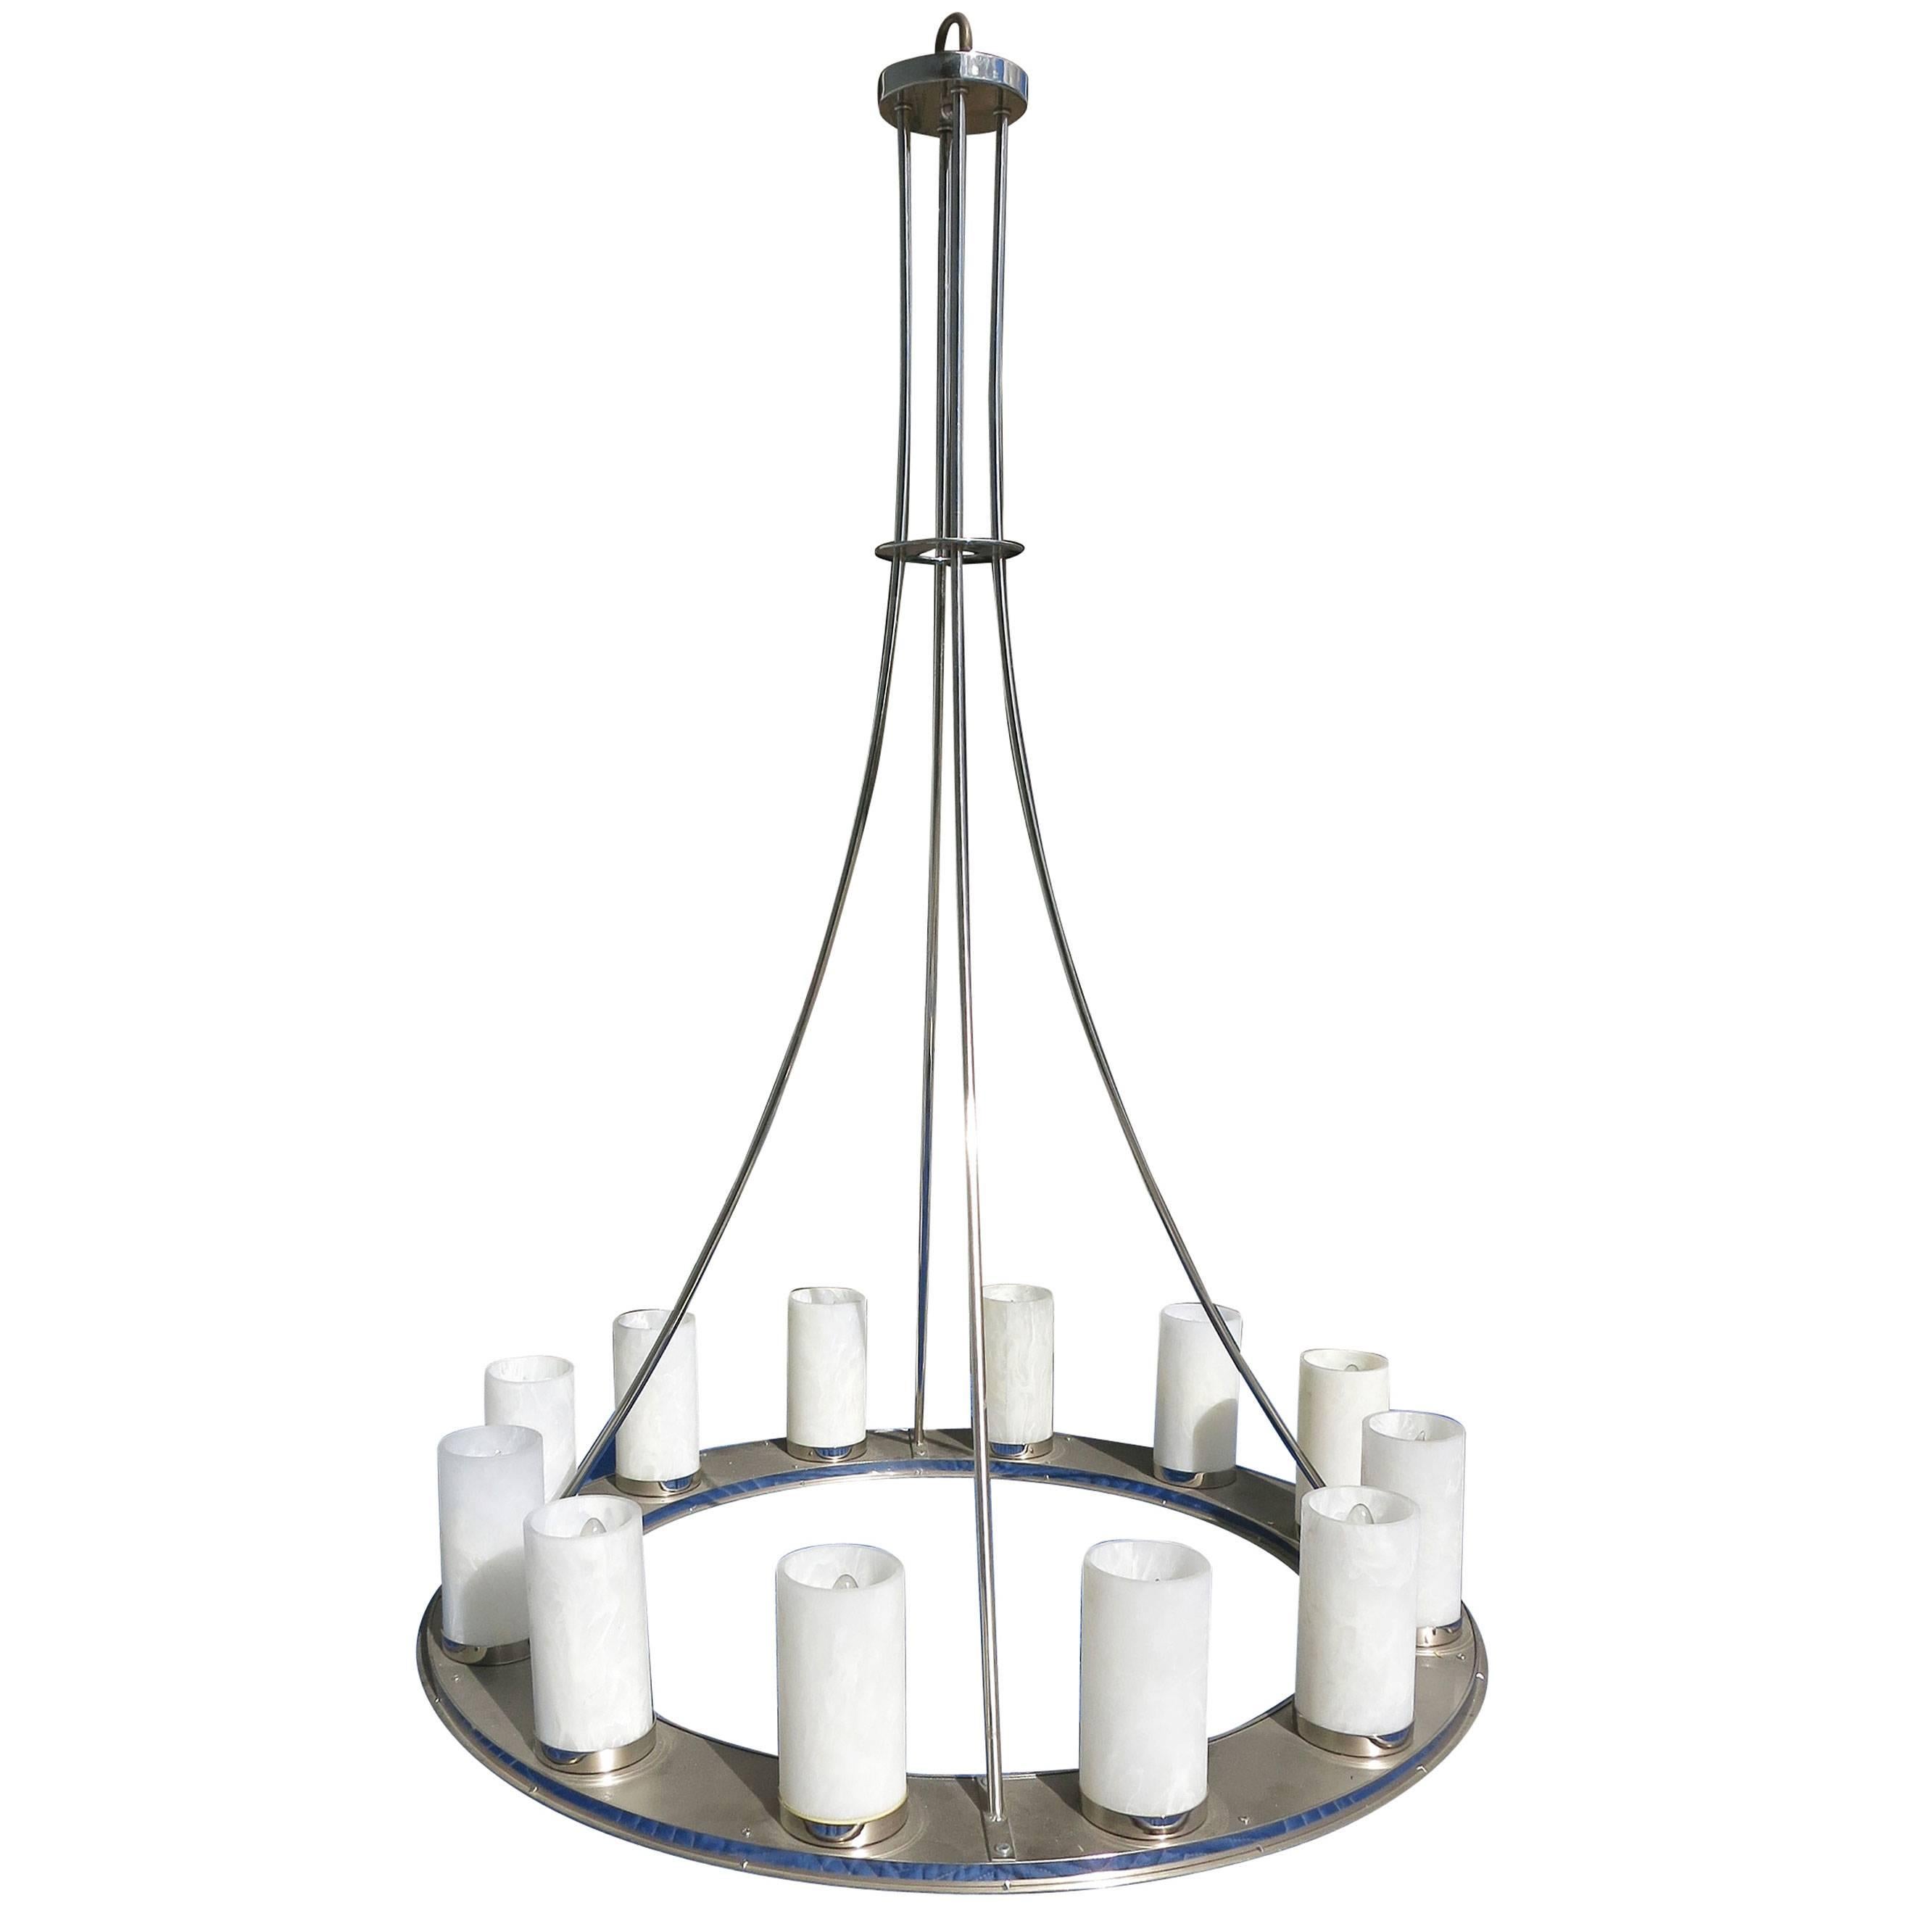 Large modernist twelve-light nickel finished chandelier with four pole design and acrylic shades. 

Product handcrafted in the USA with the highest quality materials and over 30 years of experience in luxury: Lighting (chandeliers, floor lamps,